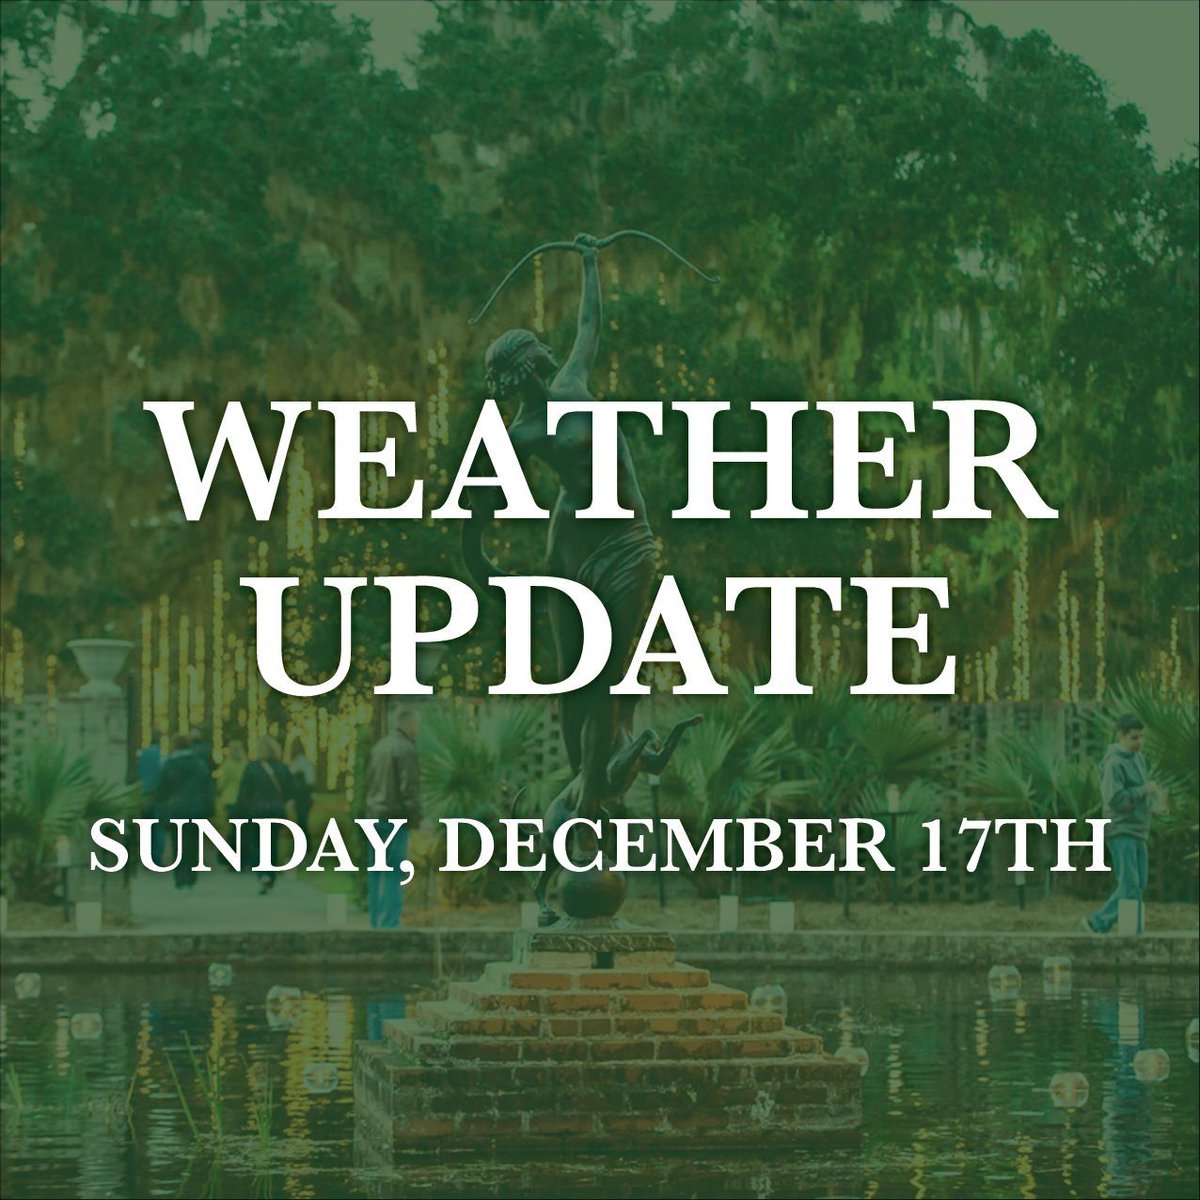 Due to inclement weather by the impending Nor’easter, we regret to inform you that Nights of a Thousand Candles scheduled for Sunday, December 17th has been canceled. The safety of our guests and staff is our top priority. Thank you for your understanding!